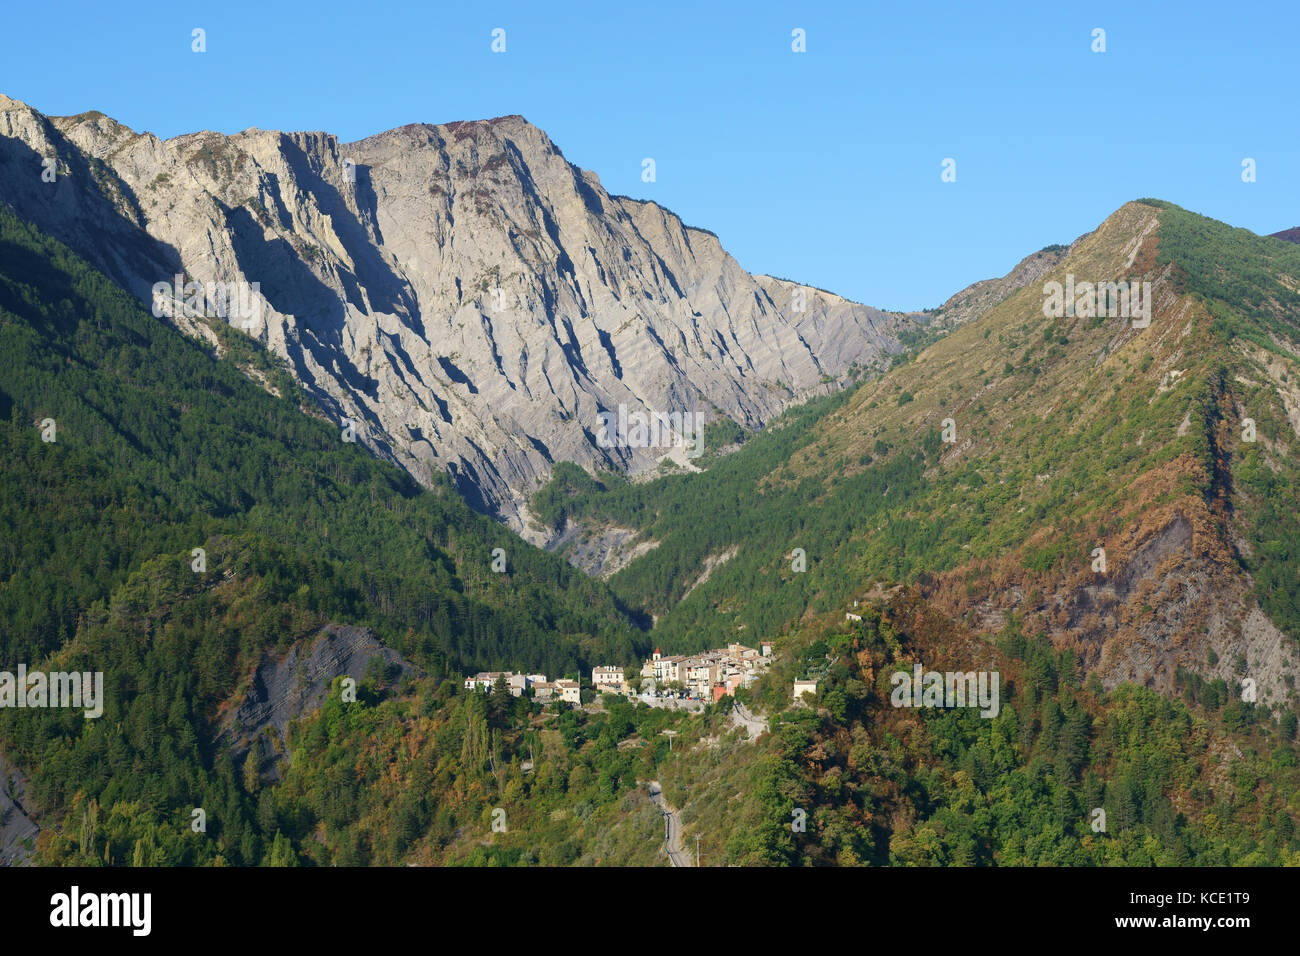 Unassuming village in a grand landscape, Montagne de Mairola (elevation: 1596m asl) in the background. Rigaud, Alpes-Maritimes, France. Stock Photo